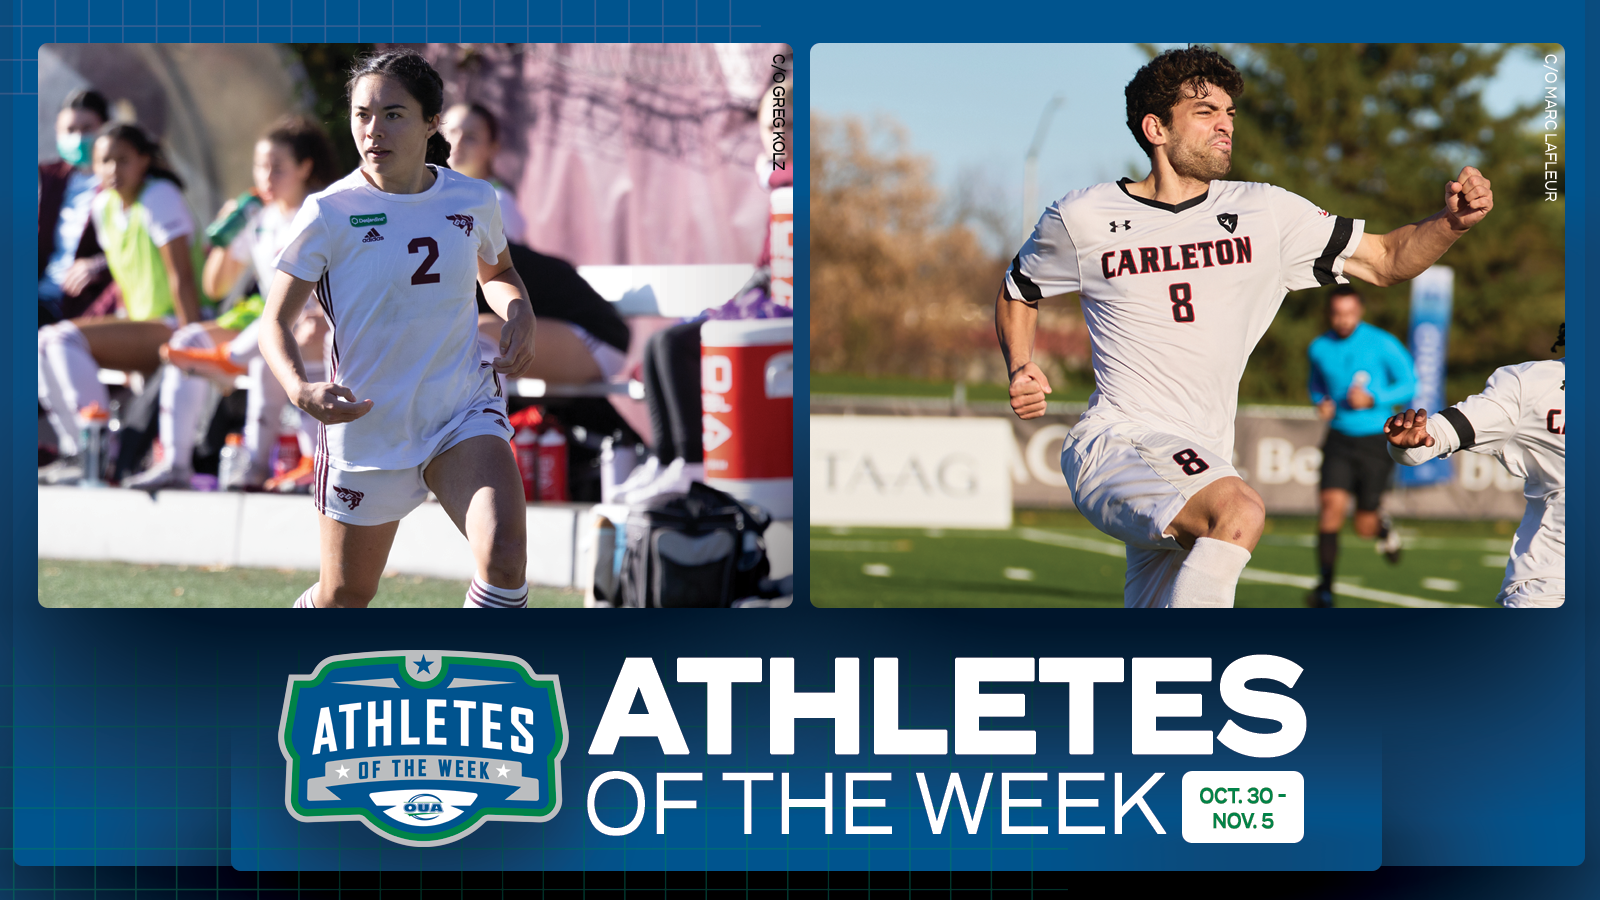 Graphic on predominantly blue background featuring side by side action photos of Ottawa women?s soccer player Jenna Matsukubo and Carleton men?s soccer player Luca Piccioli, with OUA Athletes of the Week logo and large white text that reads 'OUA Athletes of the Week' in the lower third